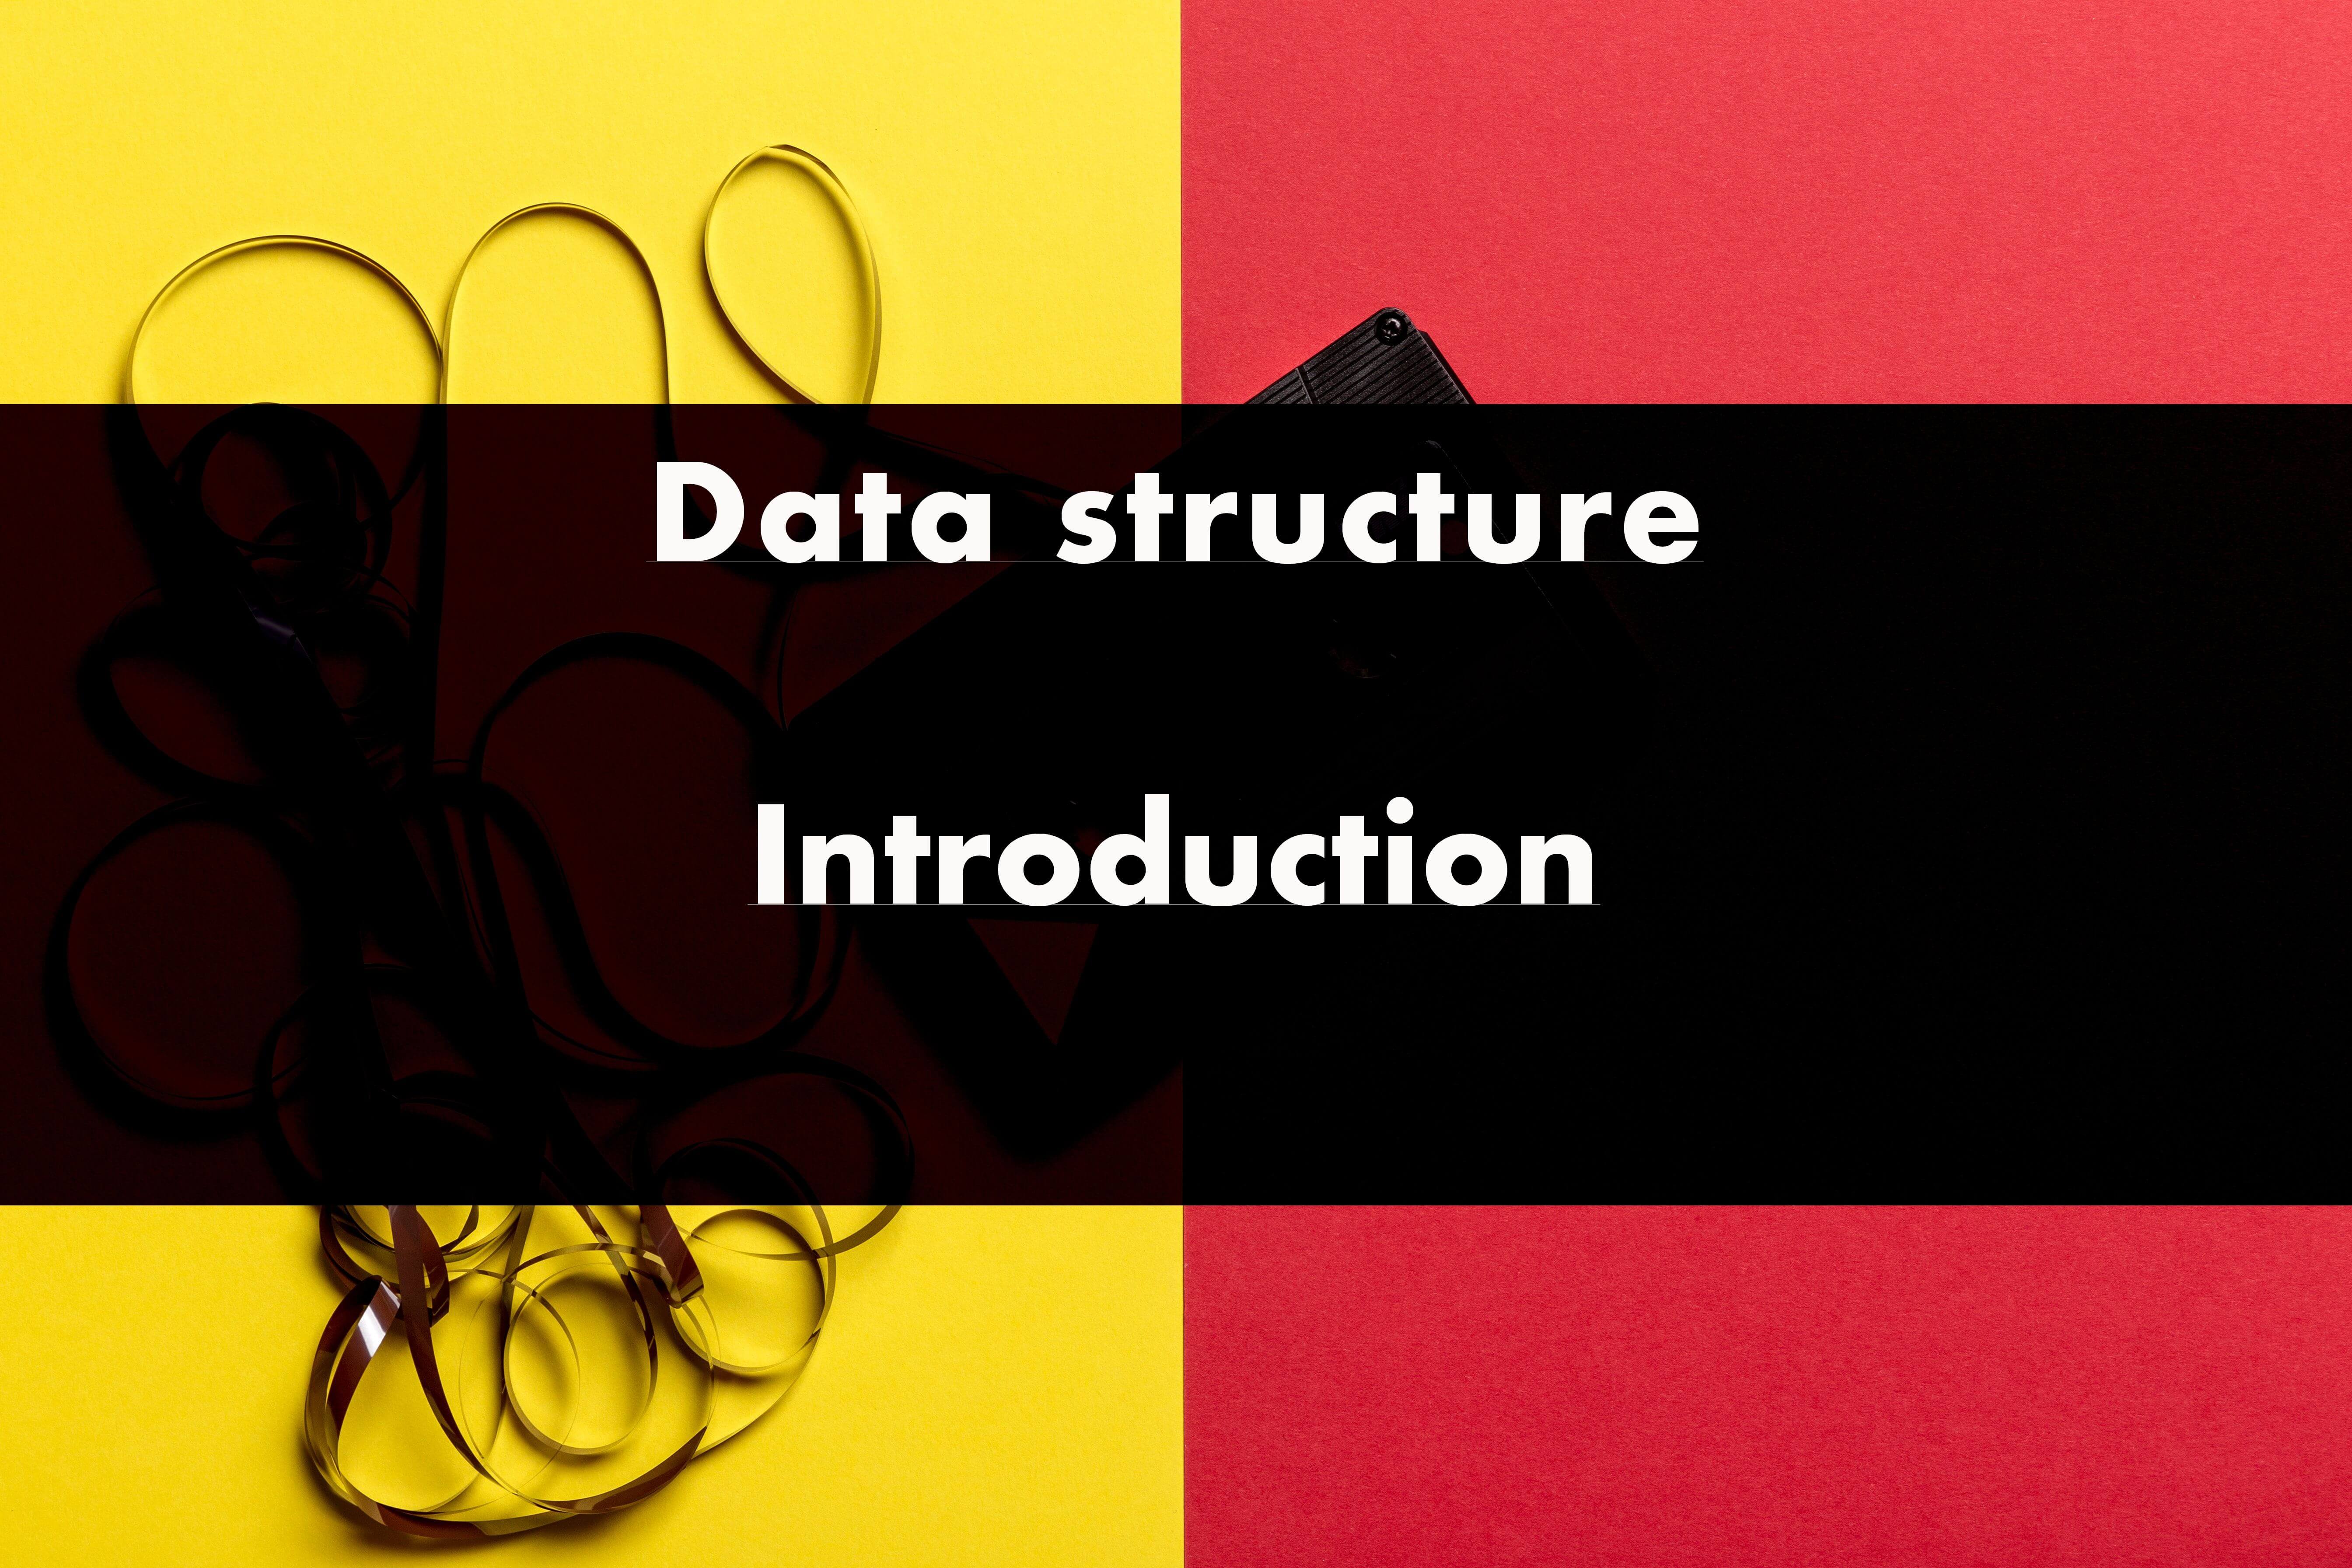 Data structure - Introduction